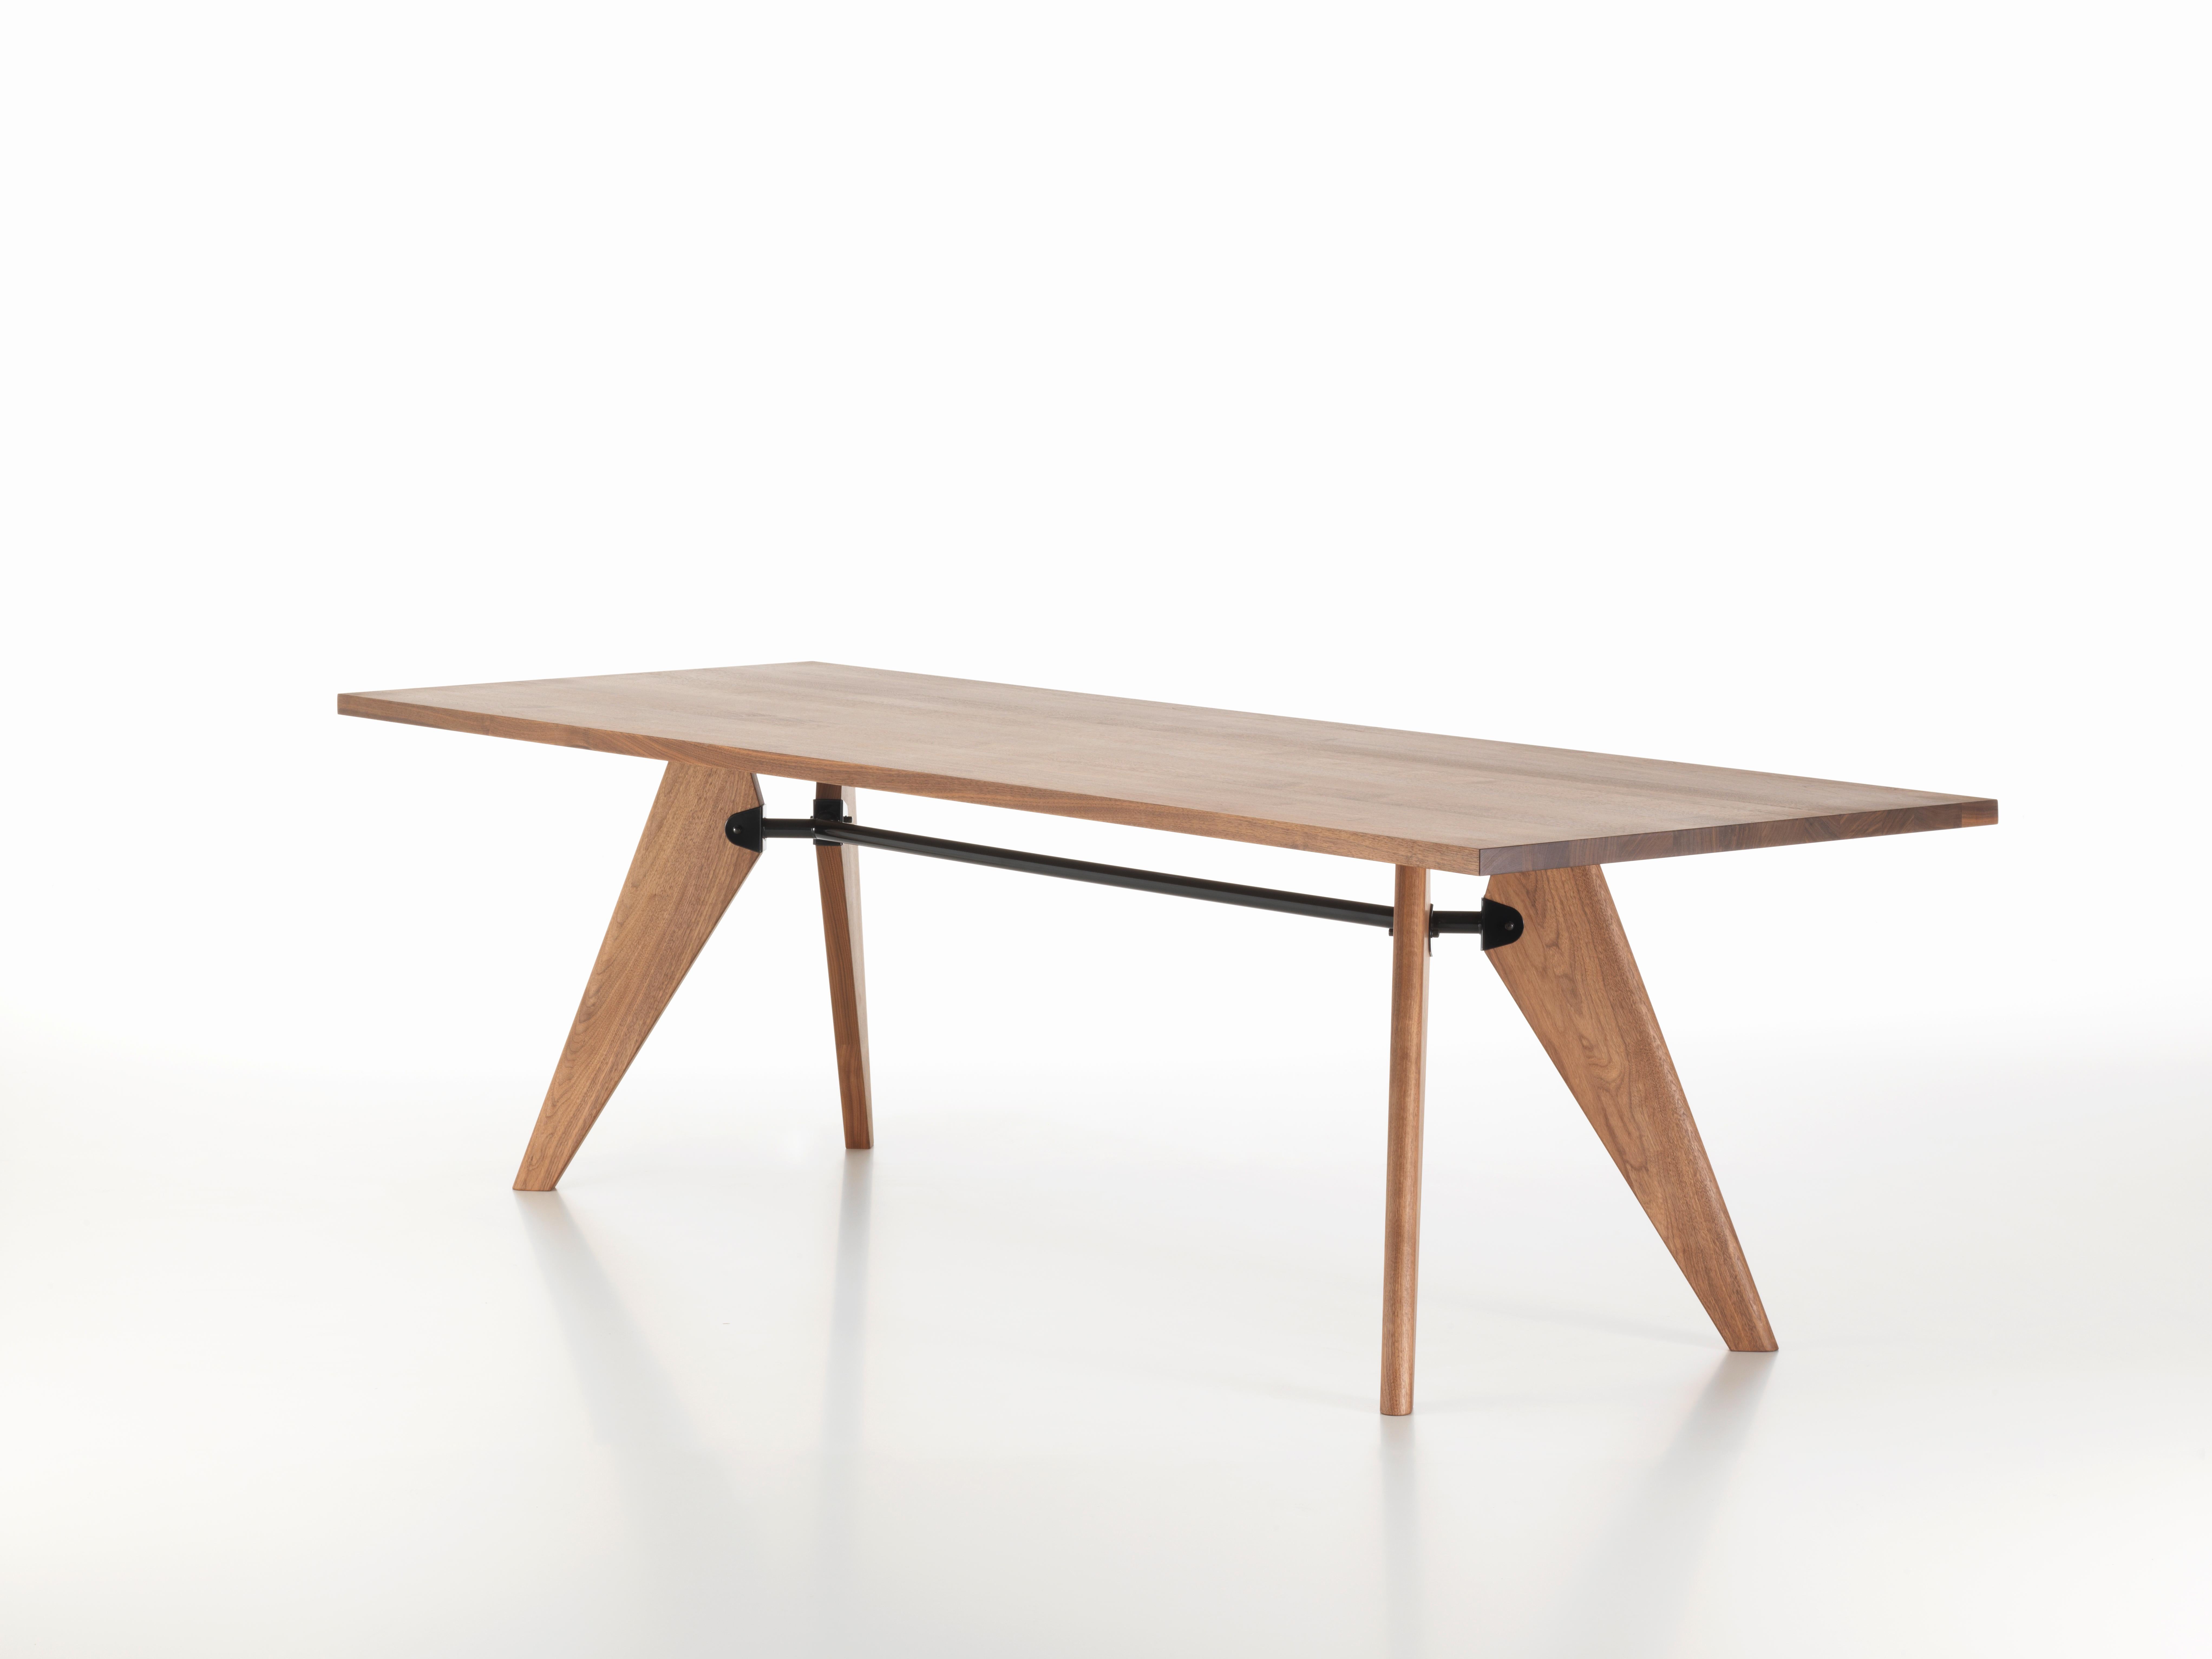 Large Jean Prouvé table Solvay in American walnut for Vitra. The Table Solvay is an early masterpiece by the French designer and engineer Jean Prouvé. During the Second World War, the Ateliers Jean Prouvé were commissioned for a number of interior